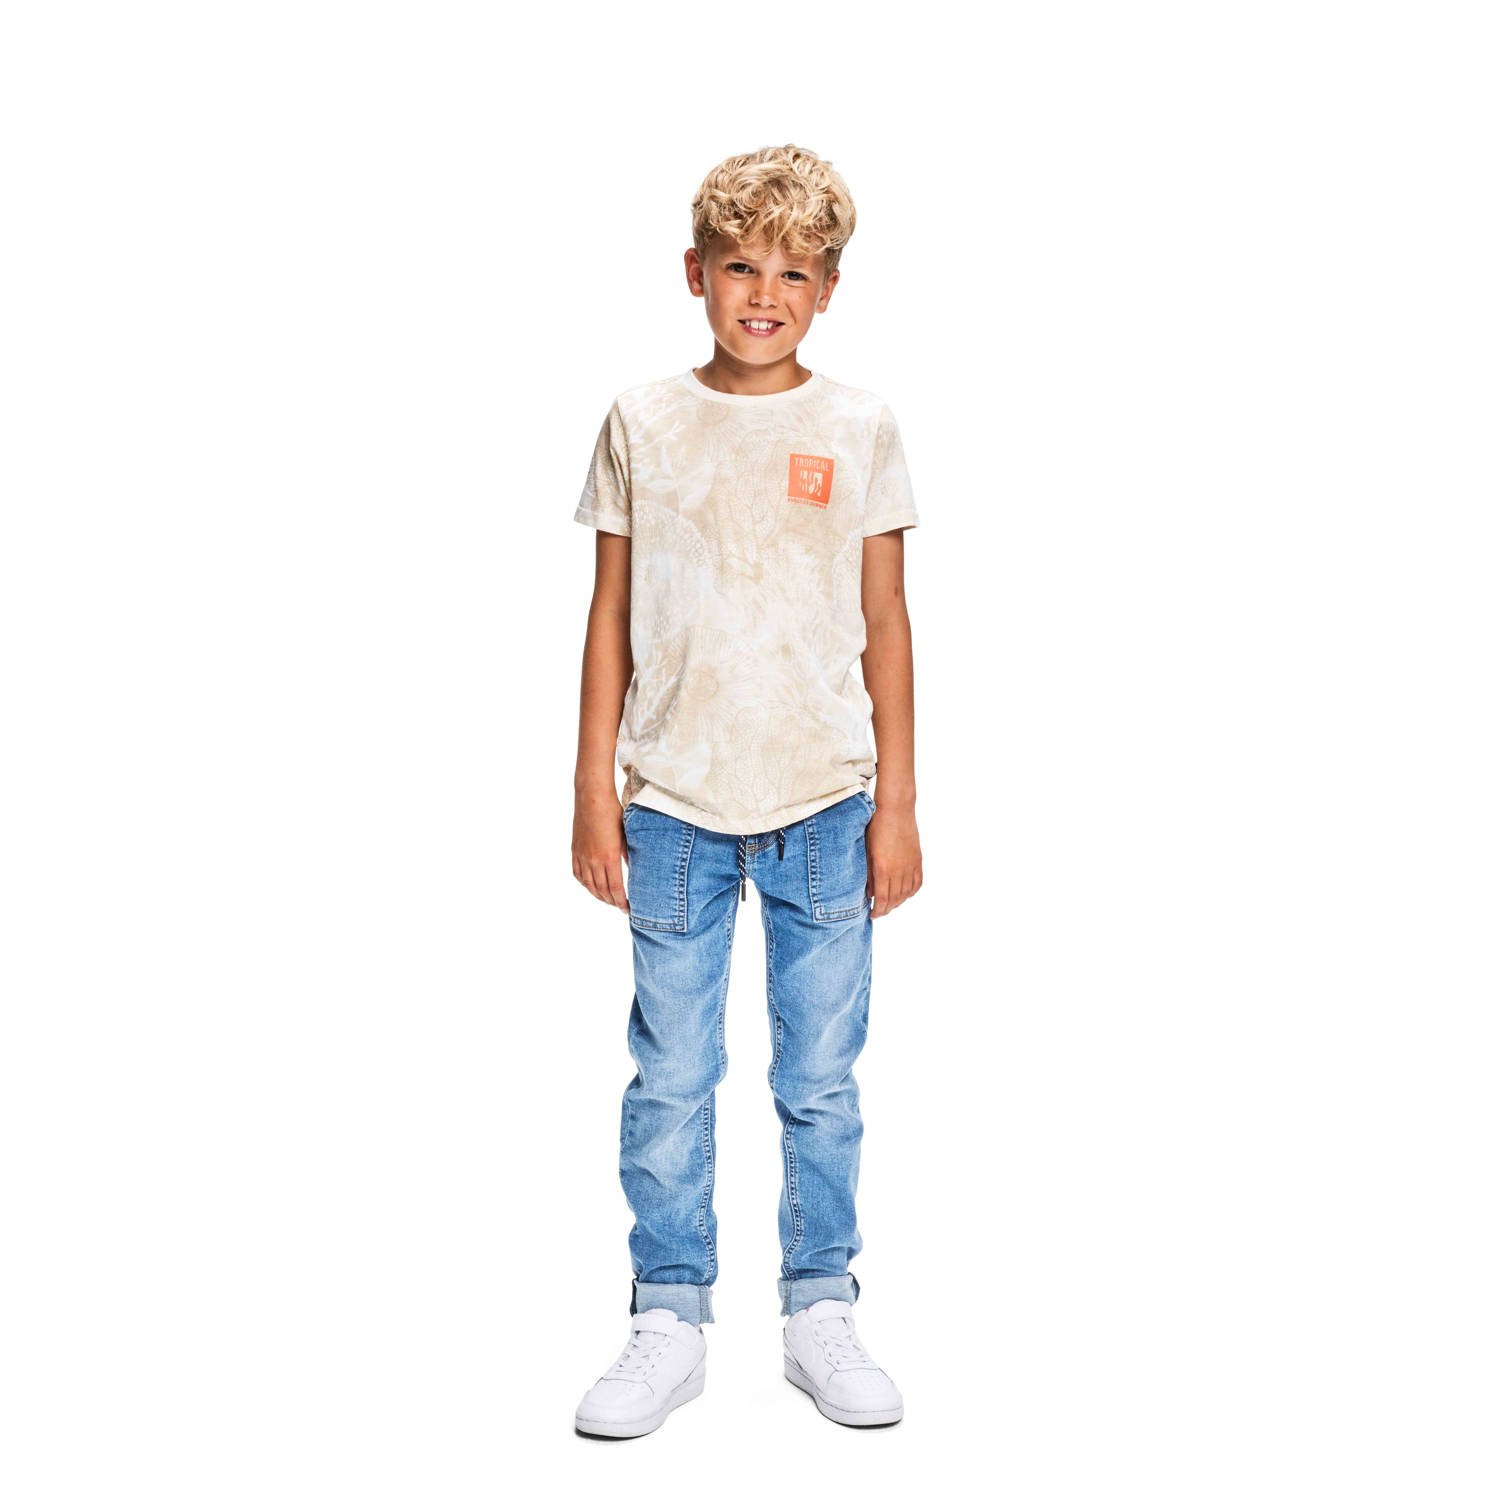 Retour Jeans T-shirt Max met all over print beige offwhite